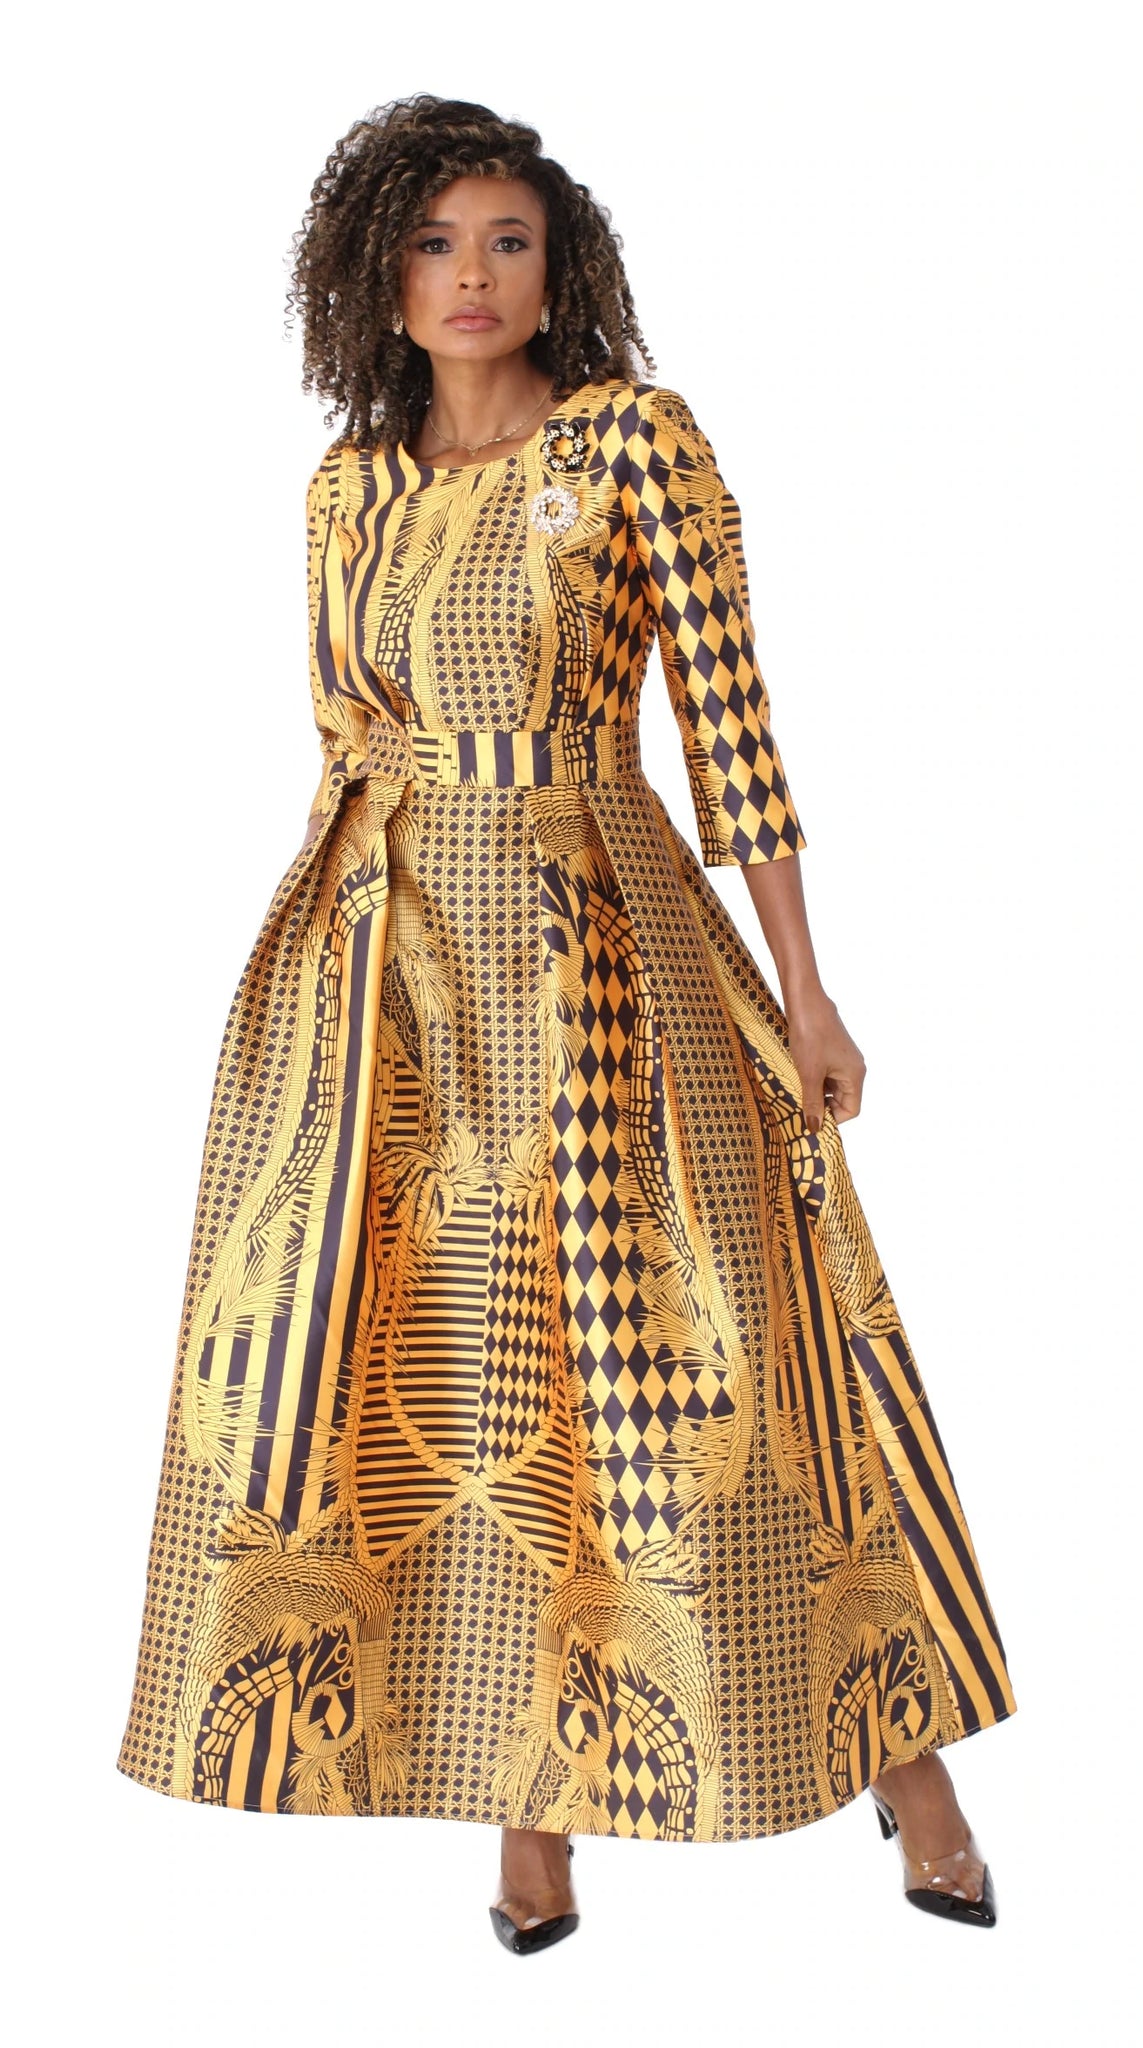 Tally Taylor Church Dress 4497-Black/Gold - Church Suits For Less